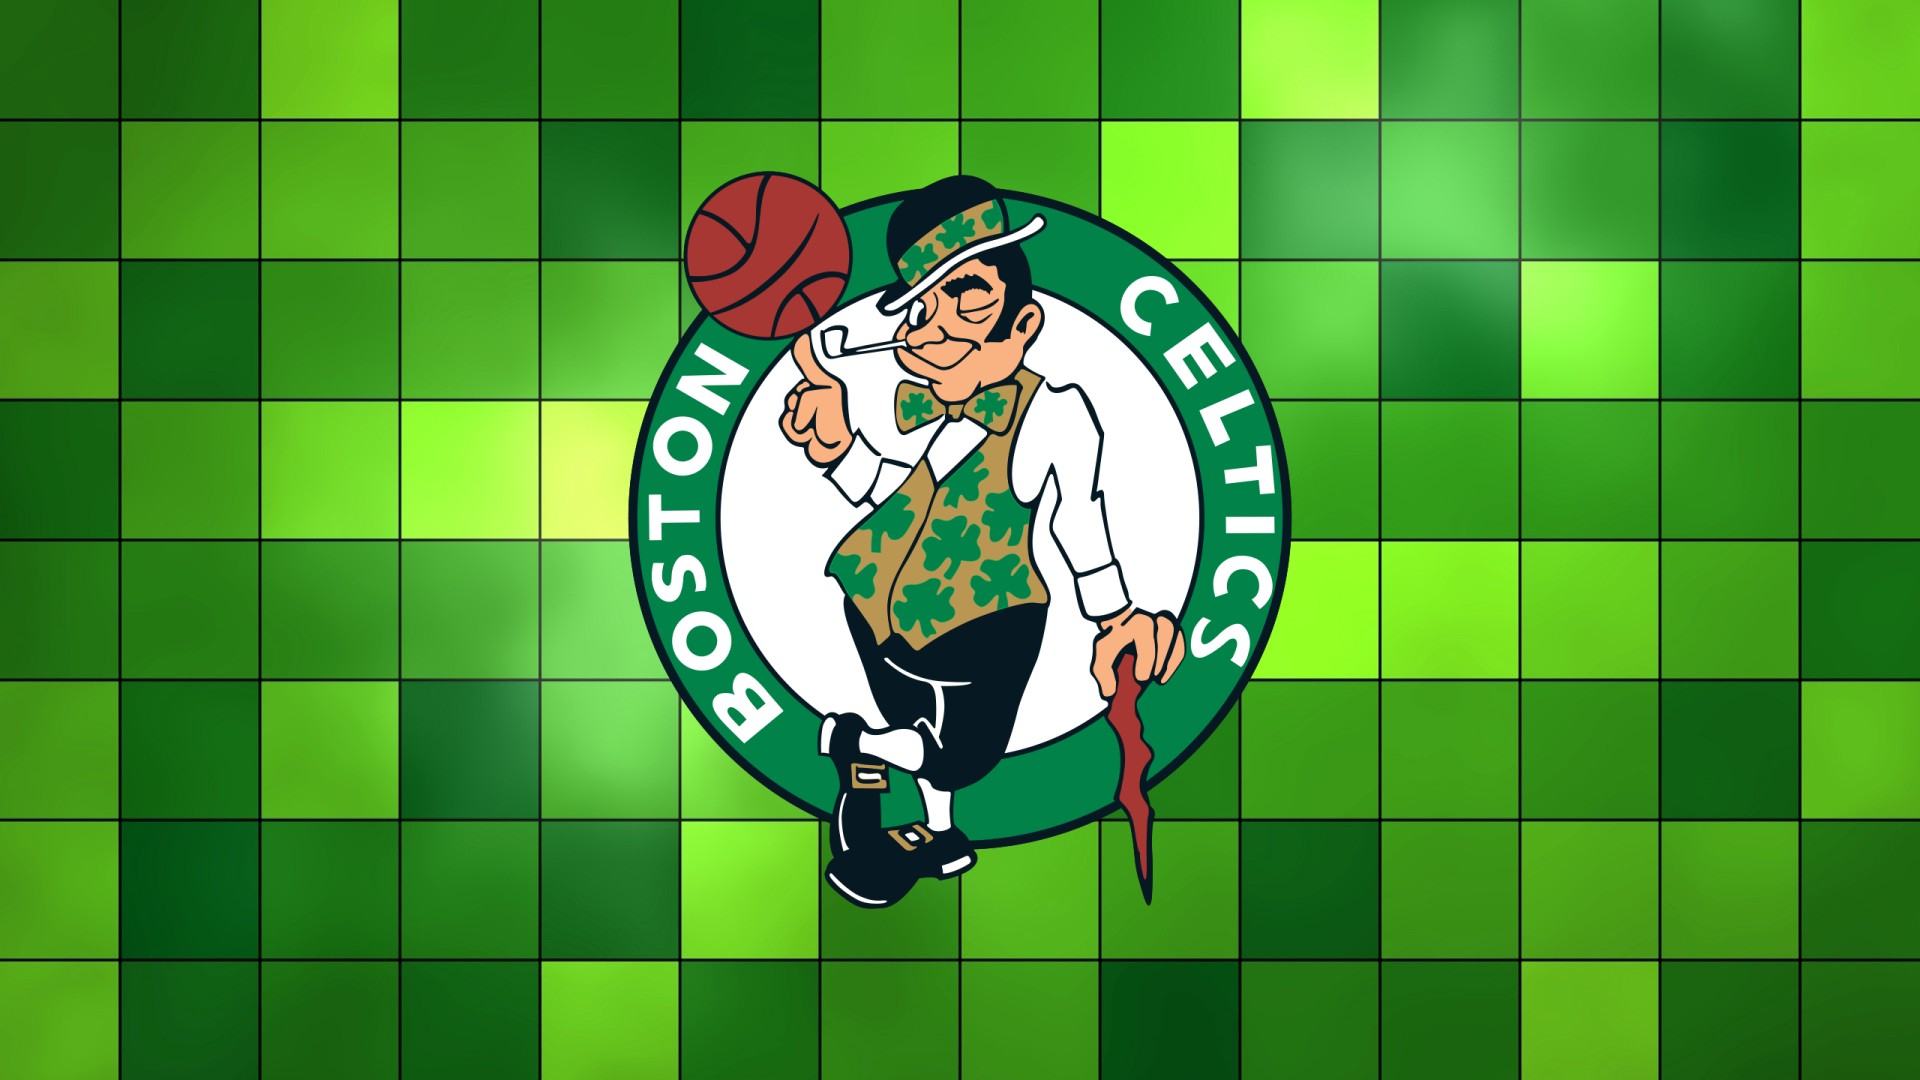 Wallpapers Computer Boston Celtics With Image Resolution - Boston Celtics Logo - HD Wallpaper 